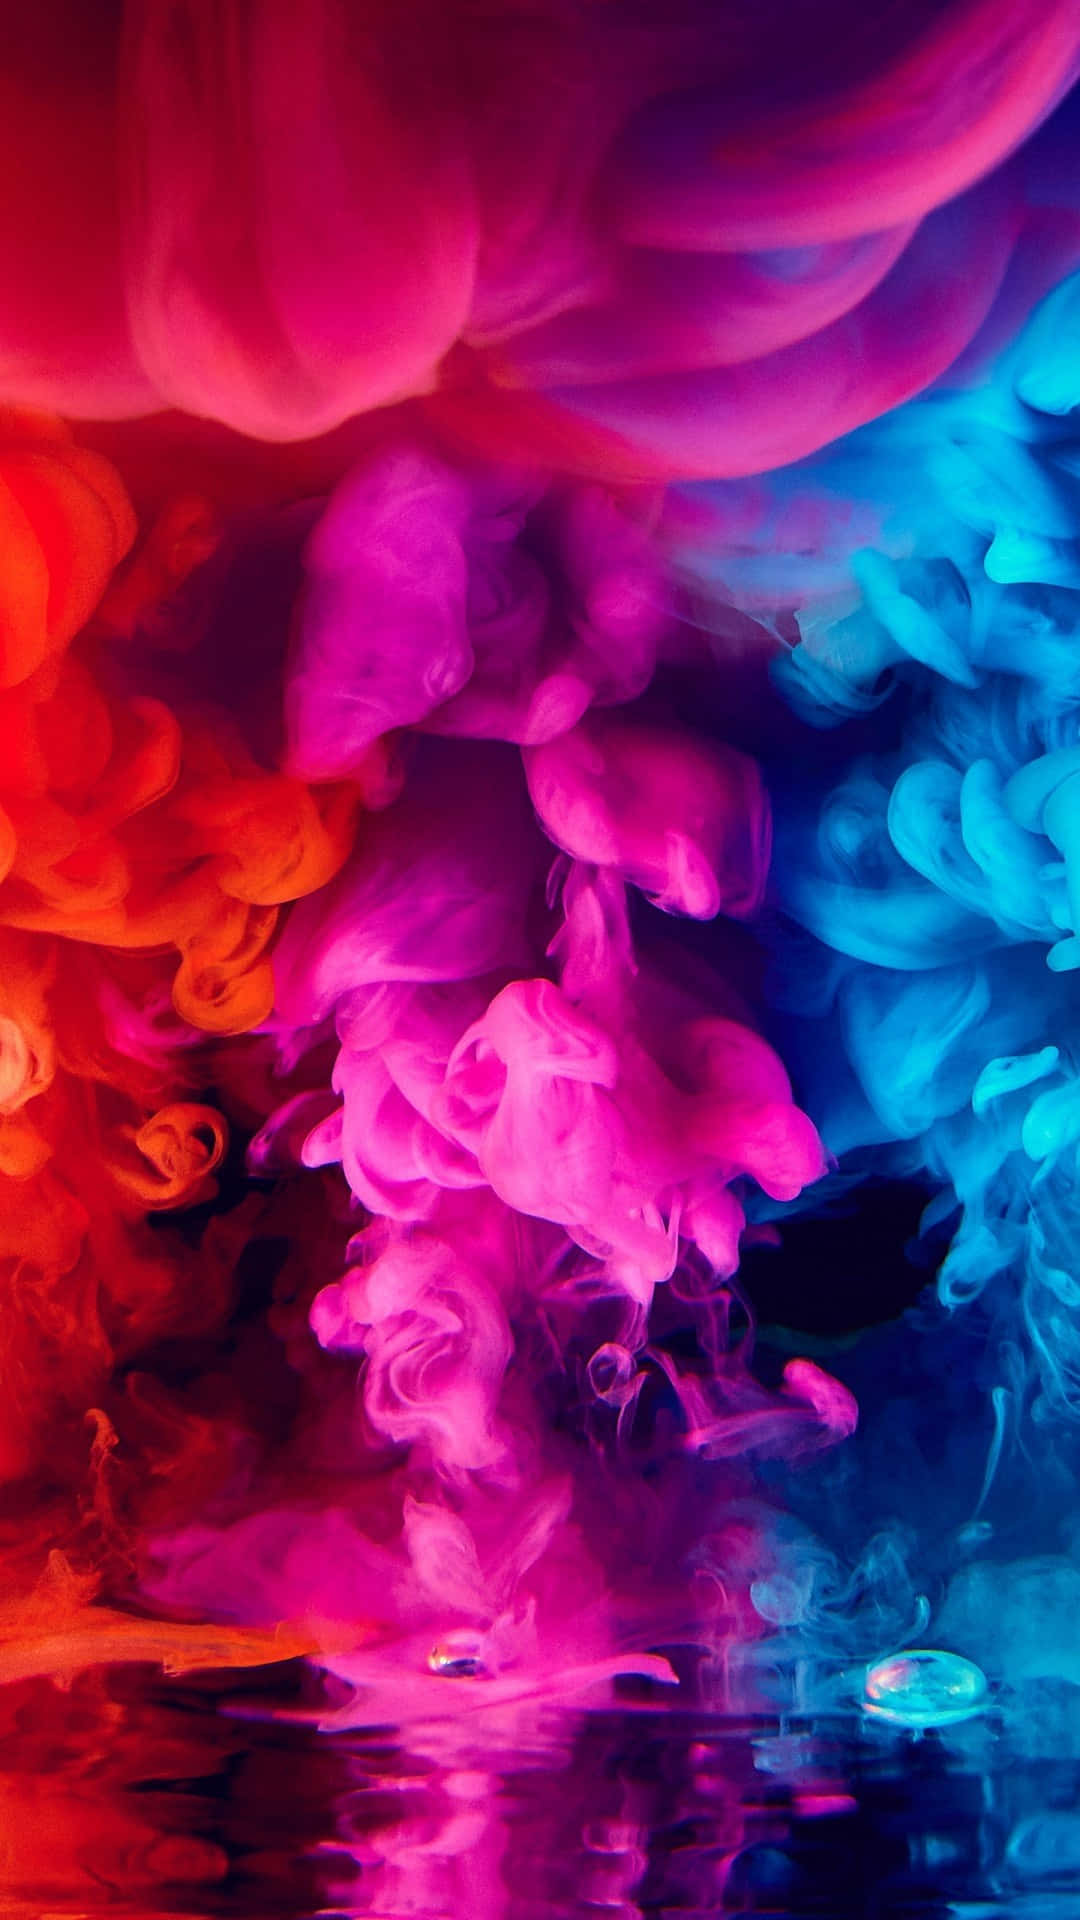 Colorful Iphone Wallpaper